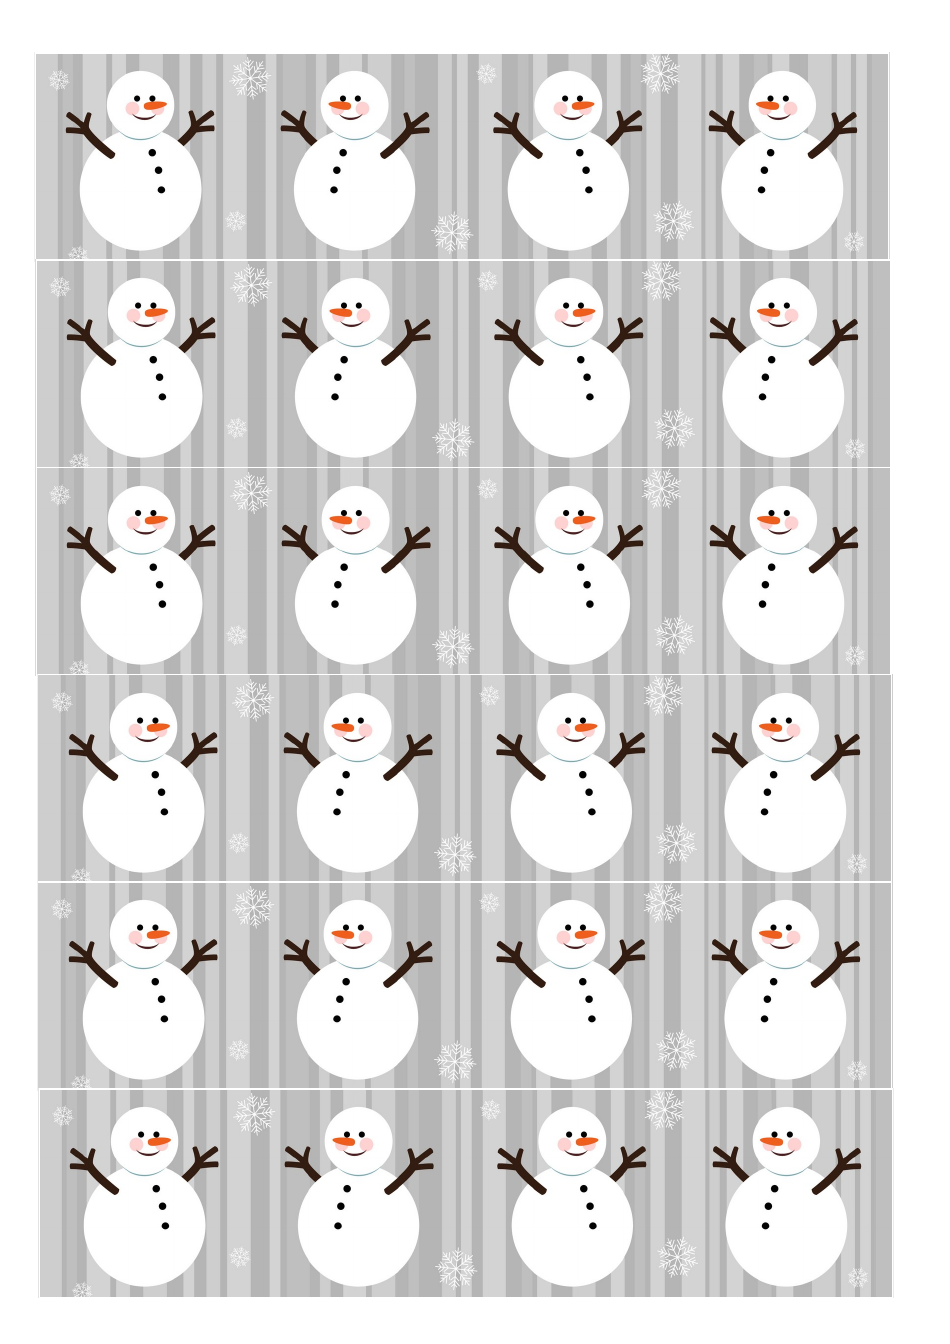 Snowman Christmas Paper Chain Template - Printable Holiday Craft